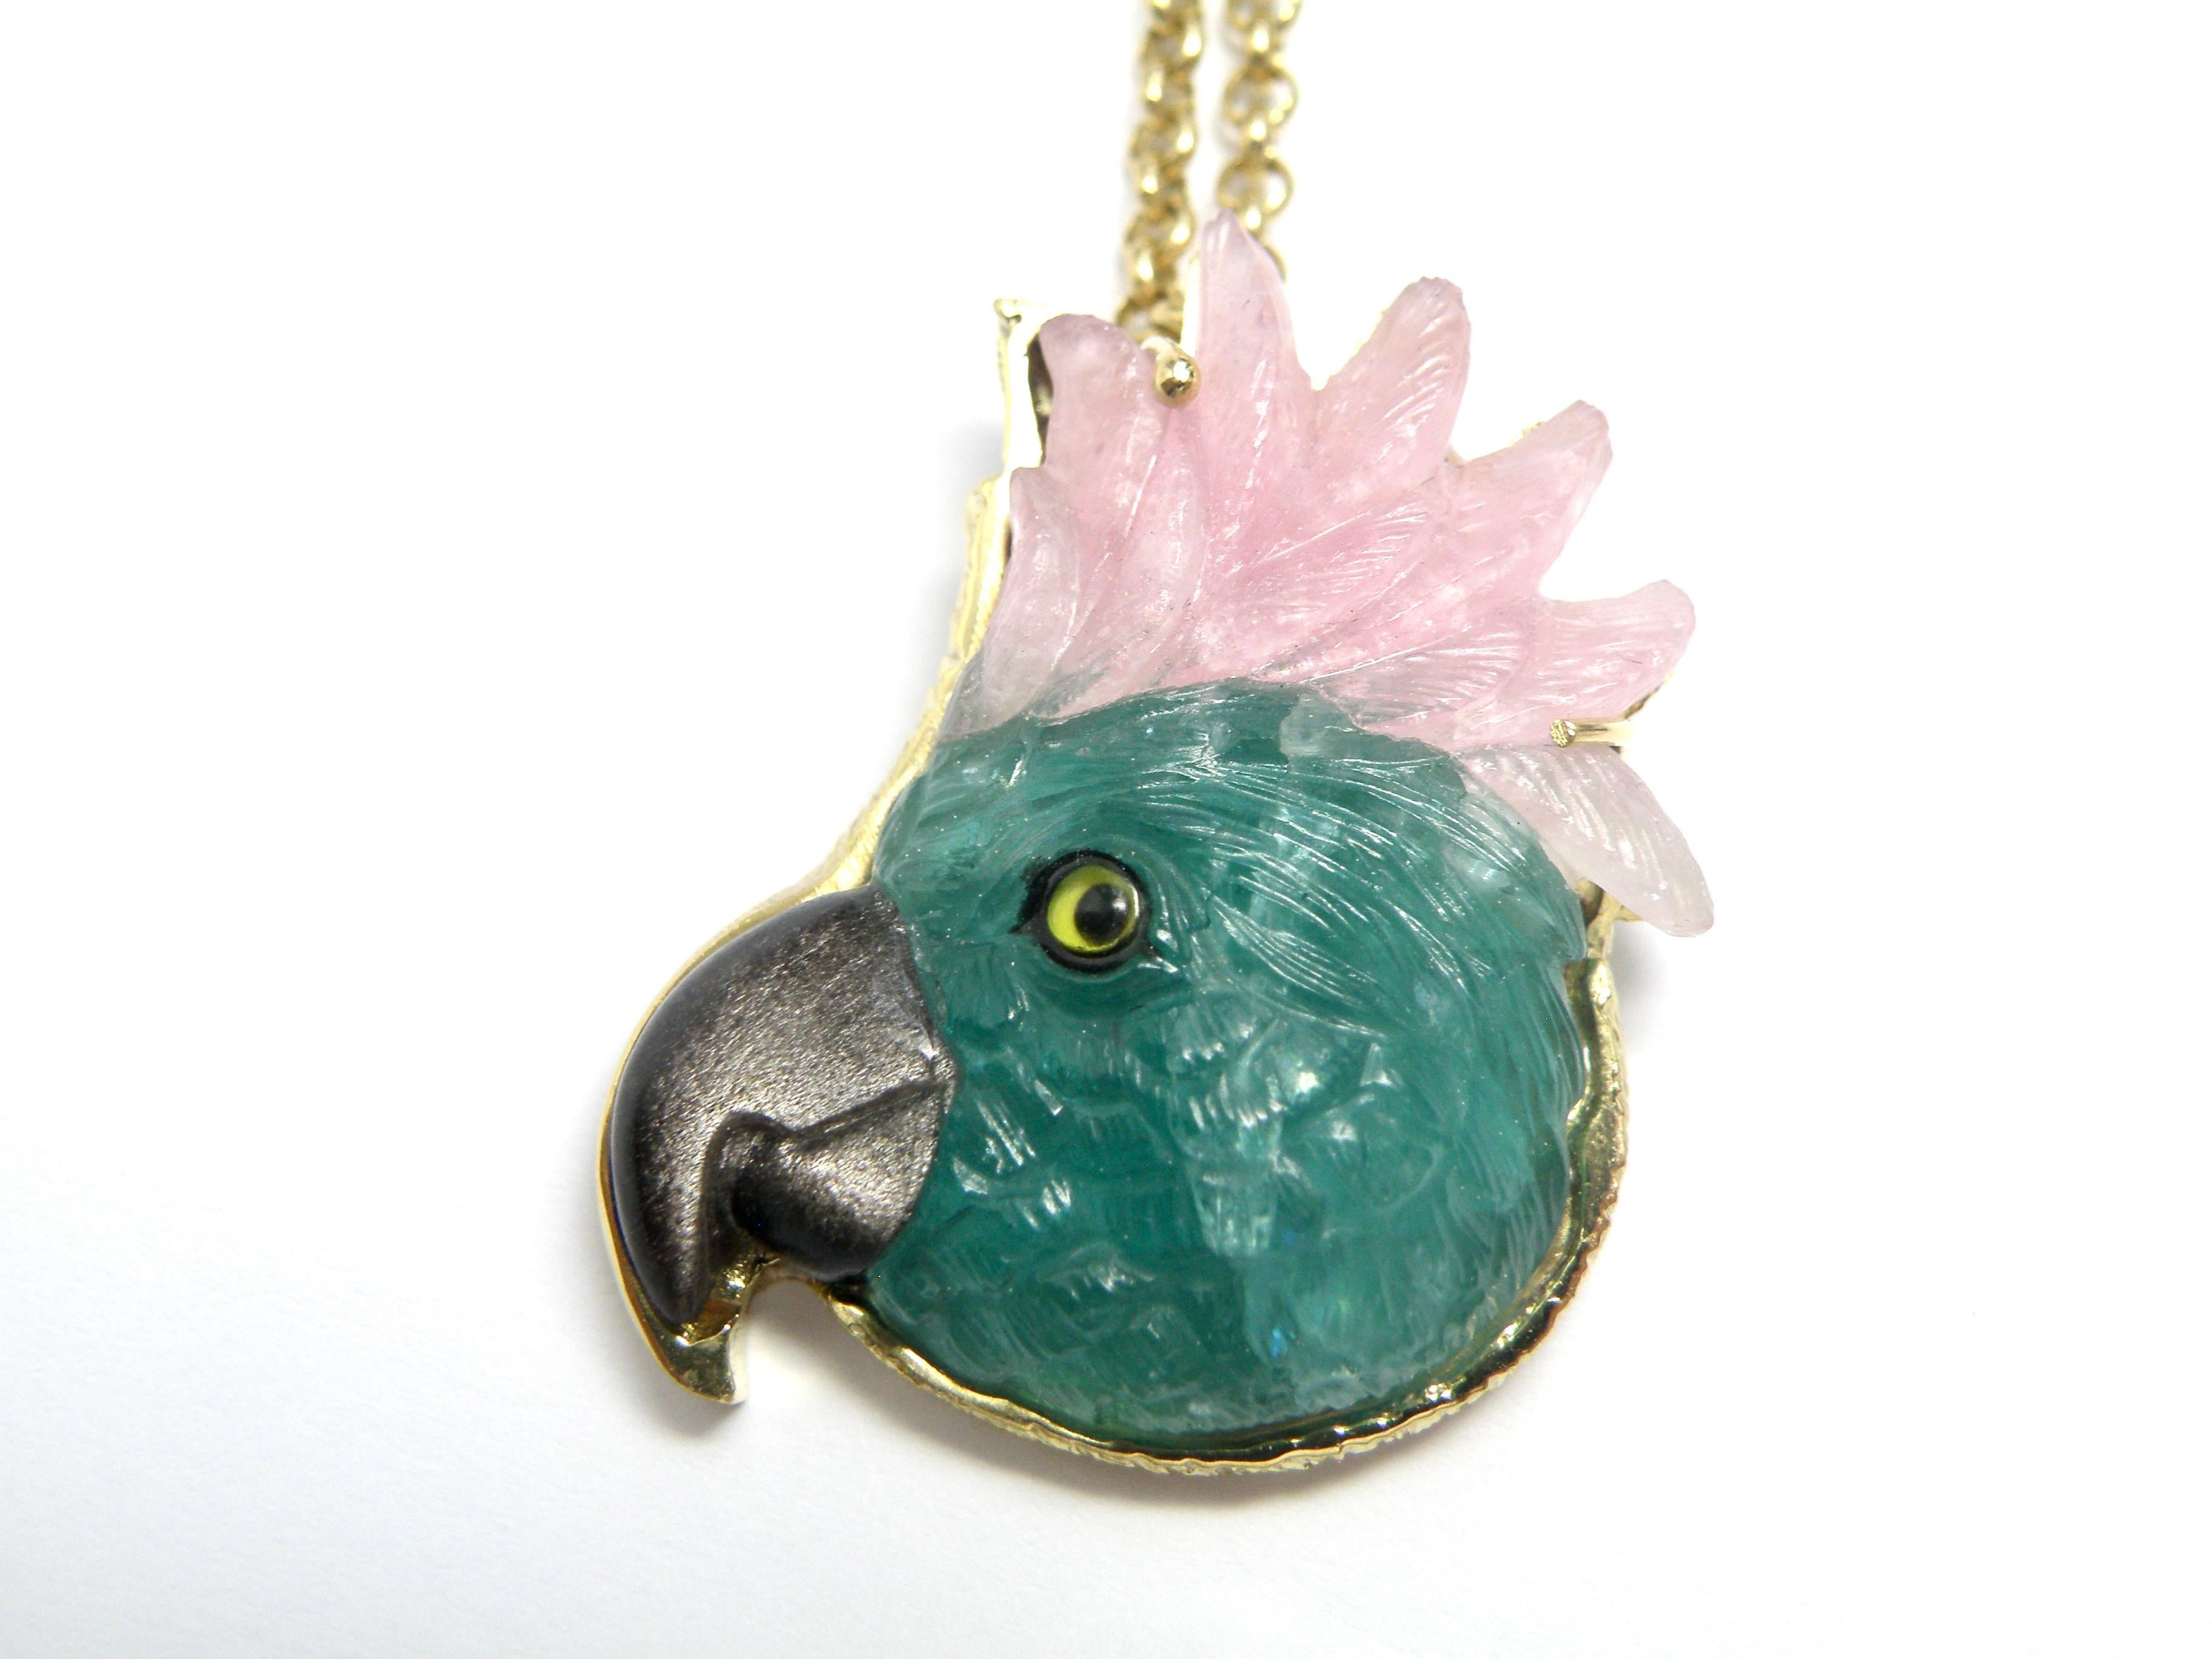 Whimsical tourmaline inlaid parrot pendant handcarved by master gem carver in Idar Oberstein, Germany.